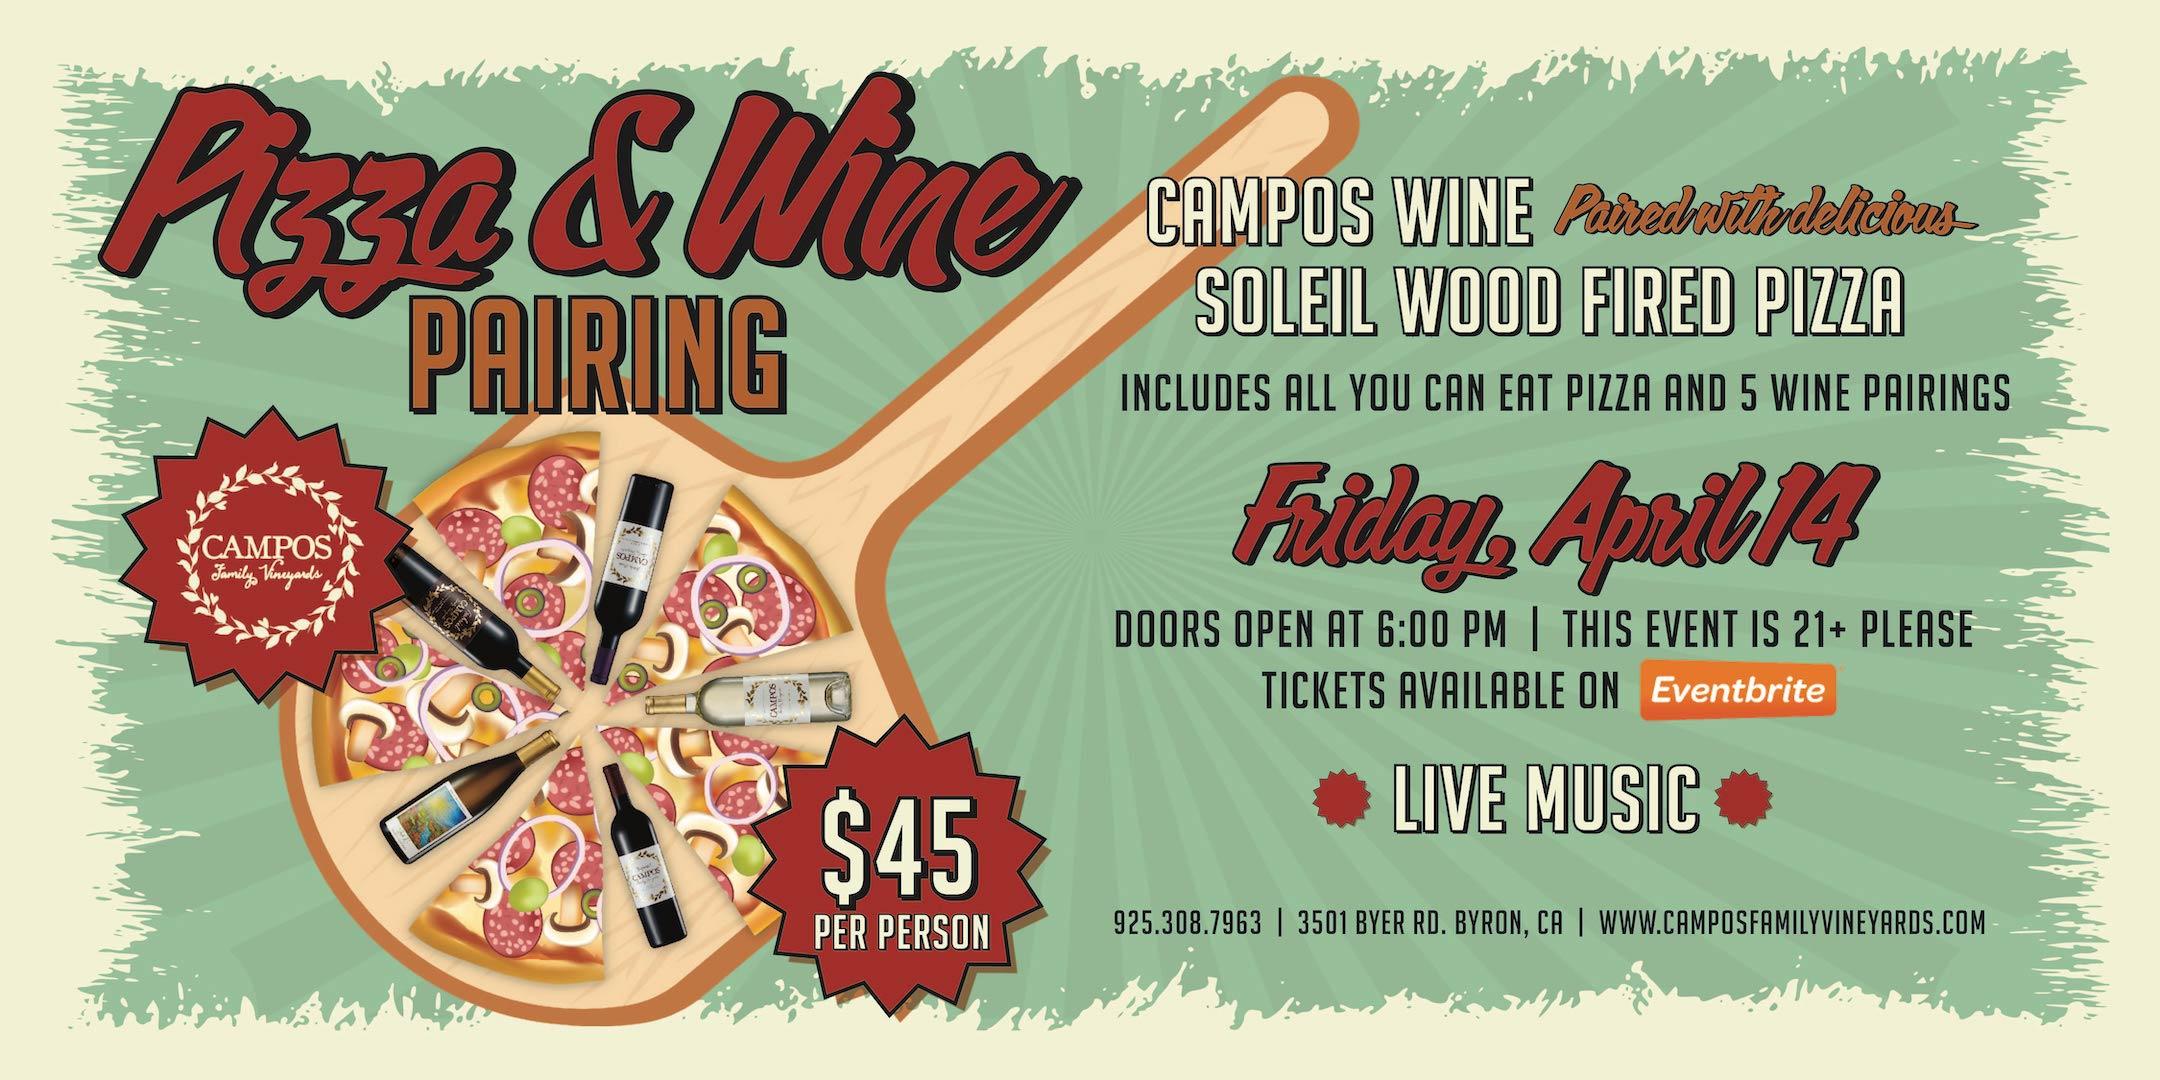 Soleil Wood Fired Pizza and Campos Wine Pairing!